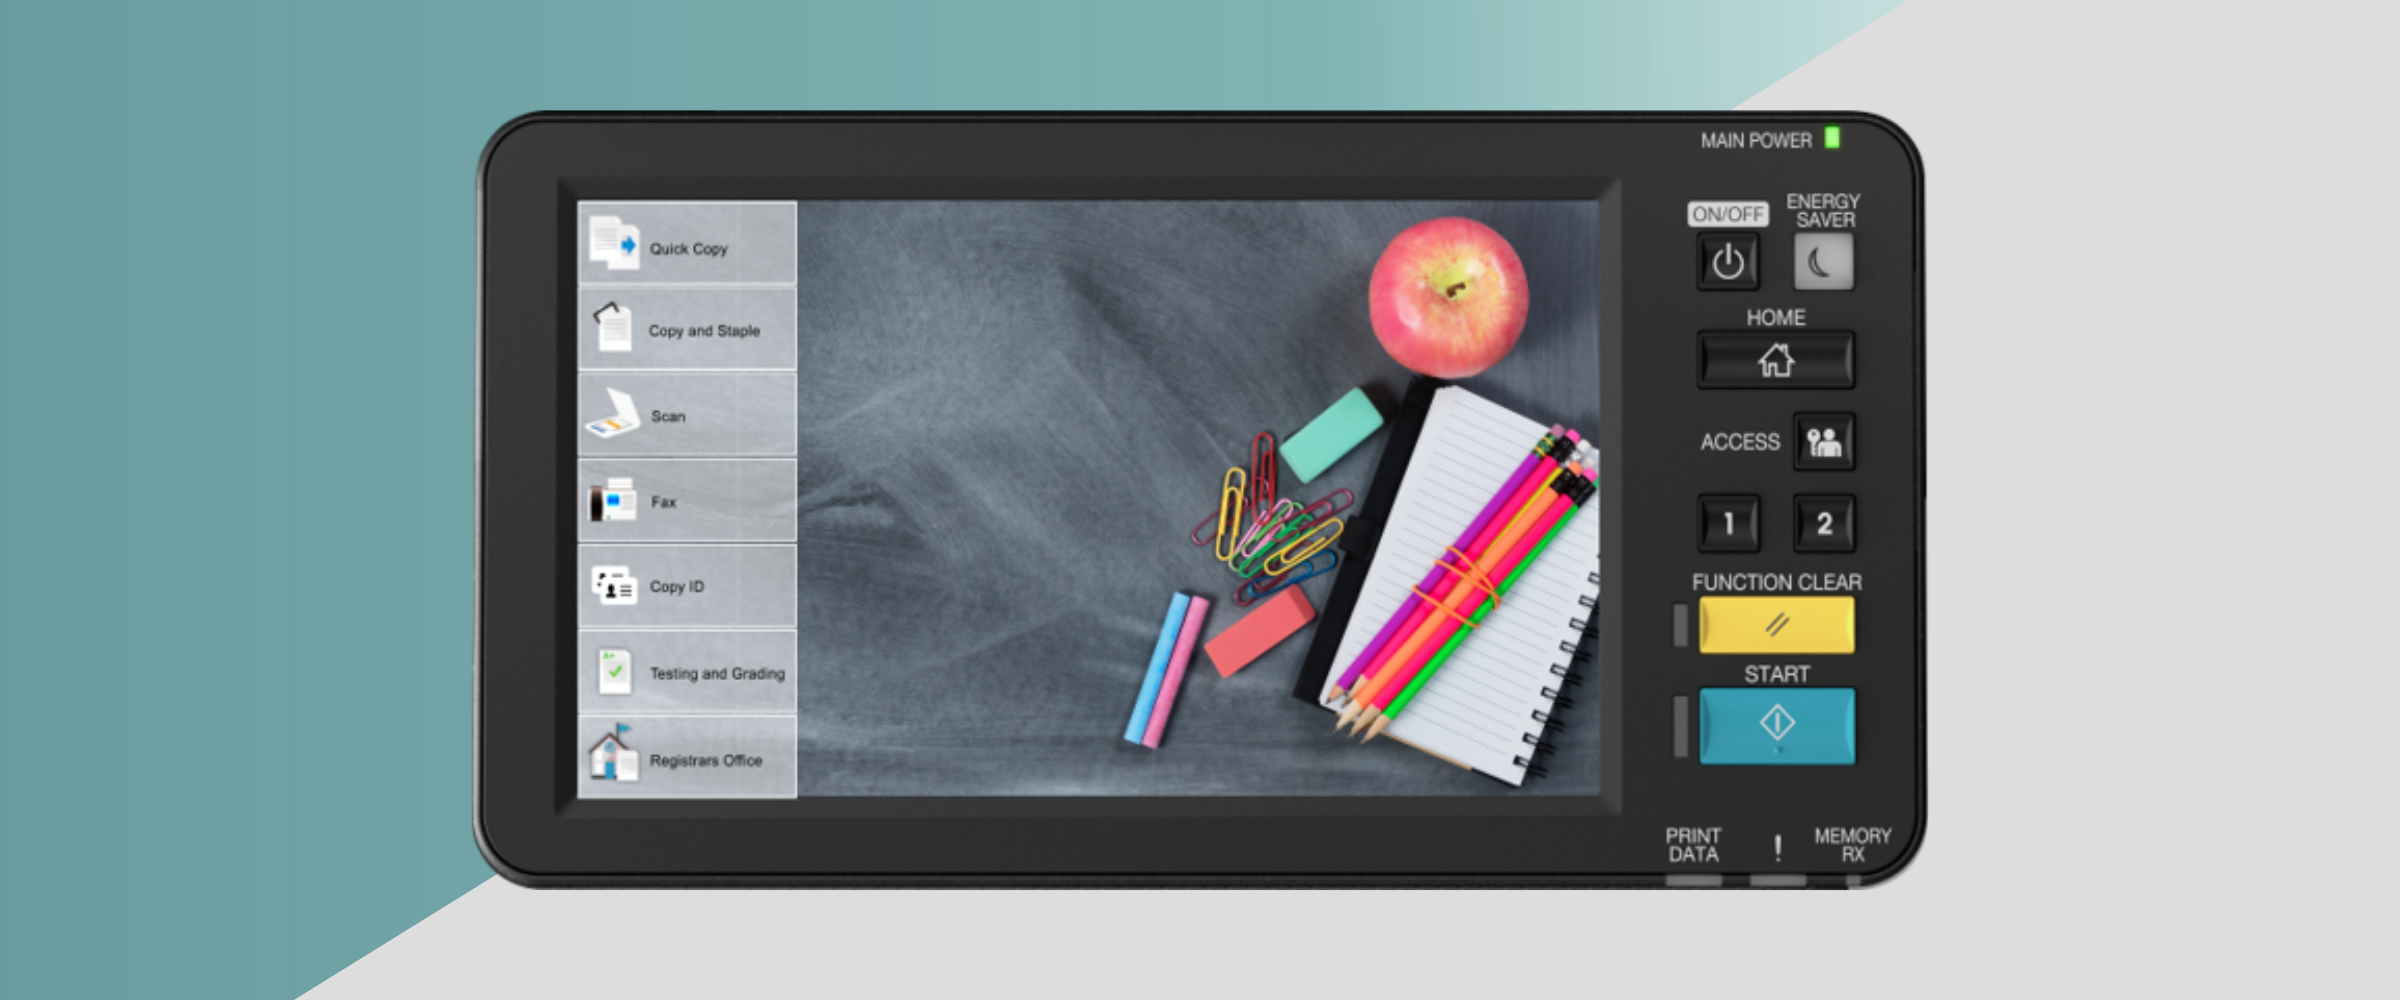 Toshiba User Interface for Schools